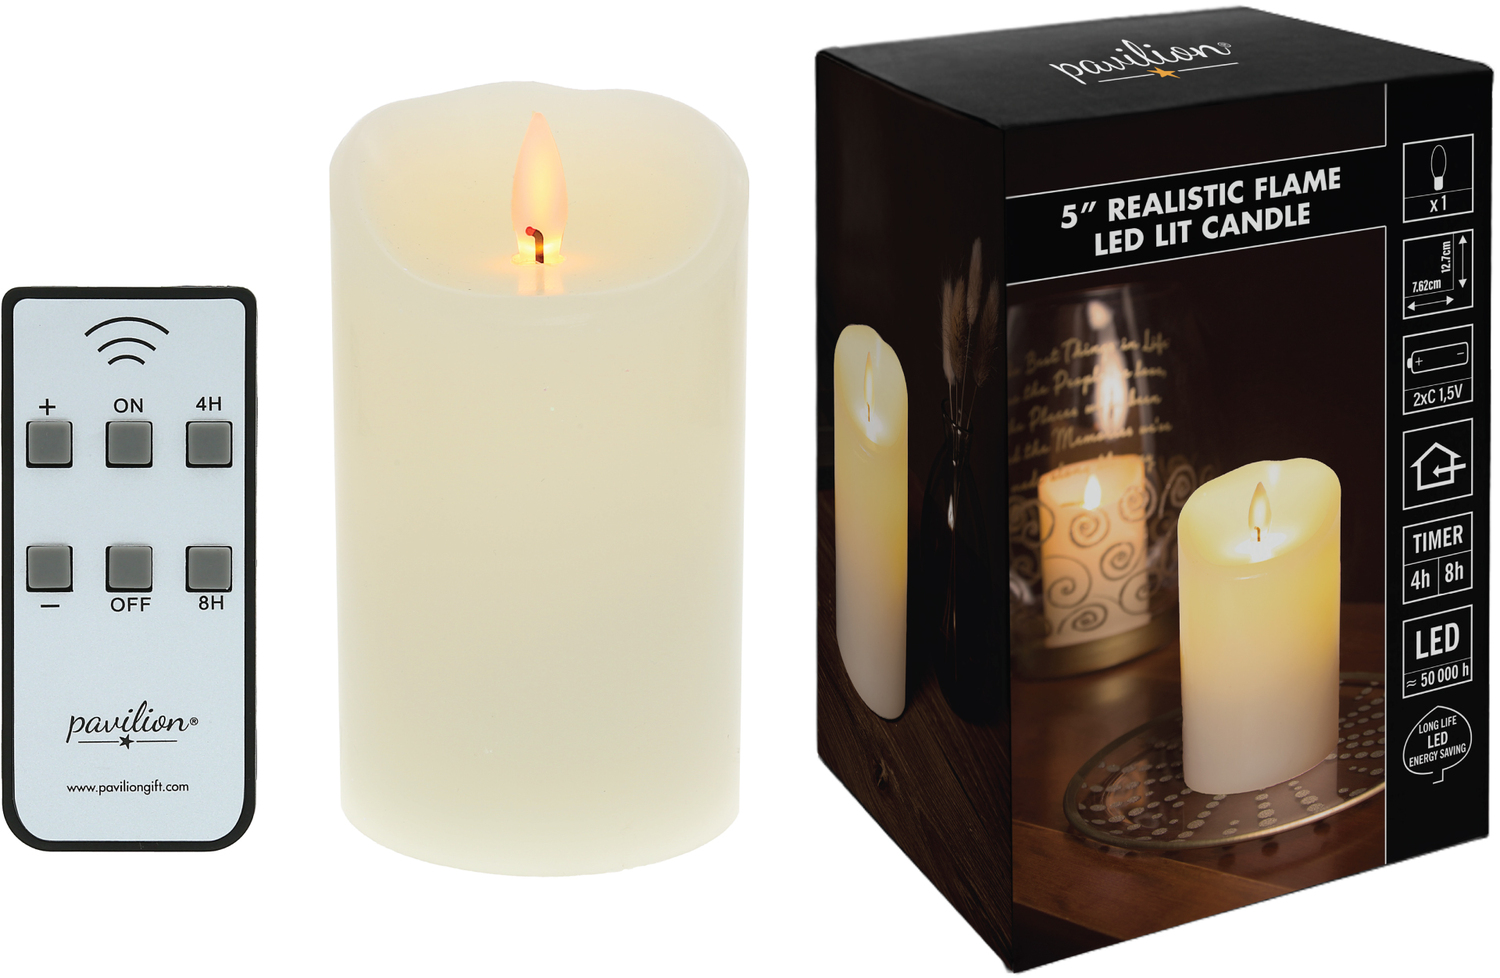 Ivory Candle by Pavilion Accessories - Ivory Candle - 5" Realistic Flame LED Lit Candle